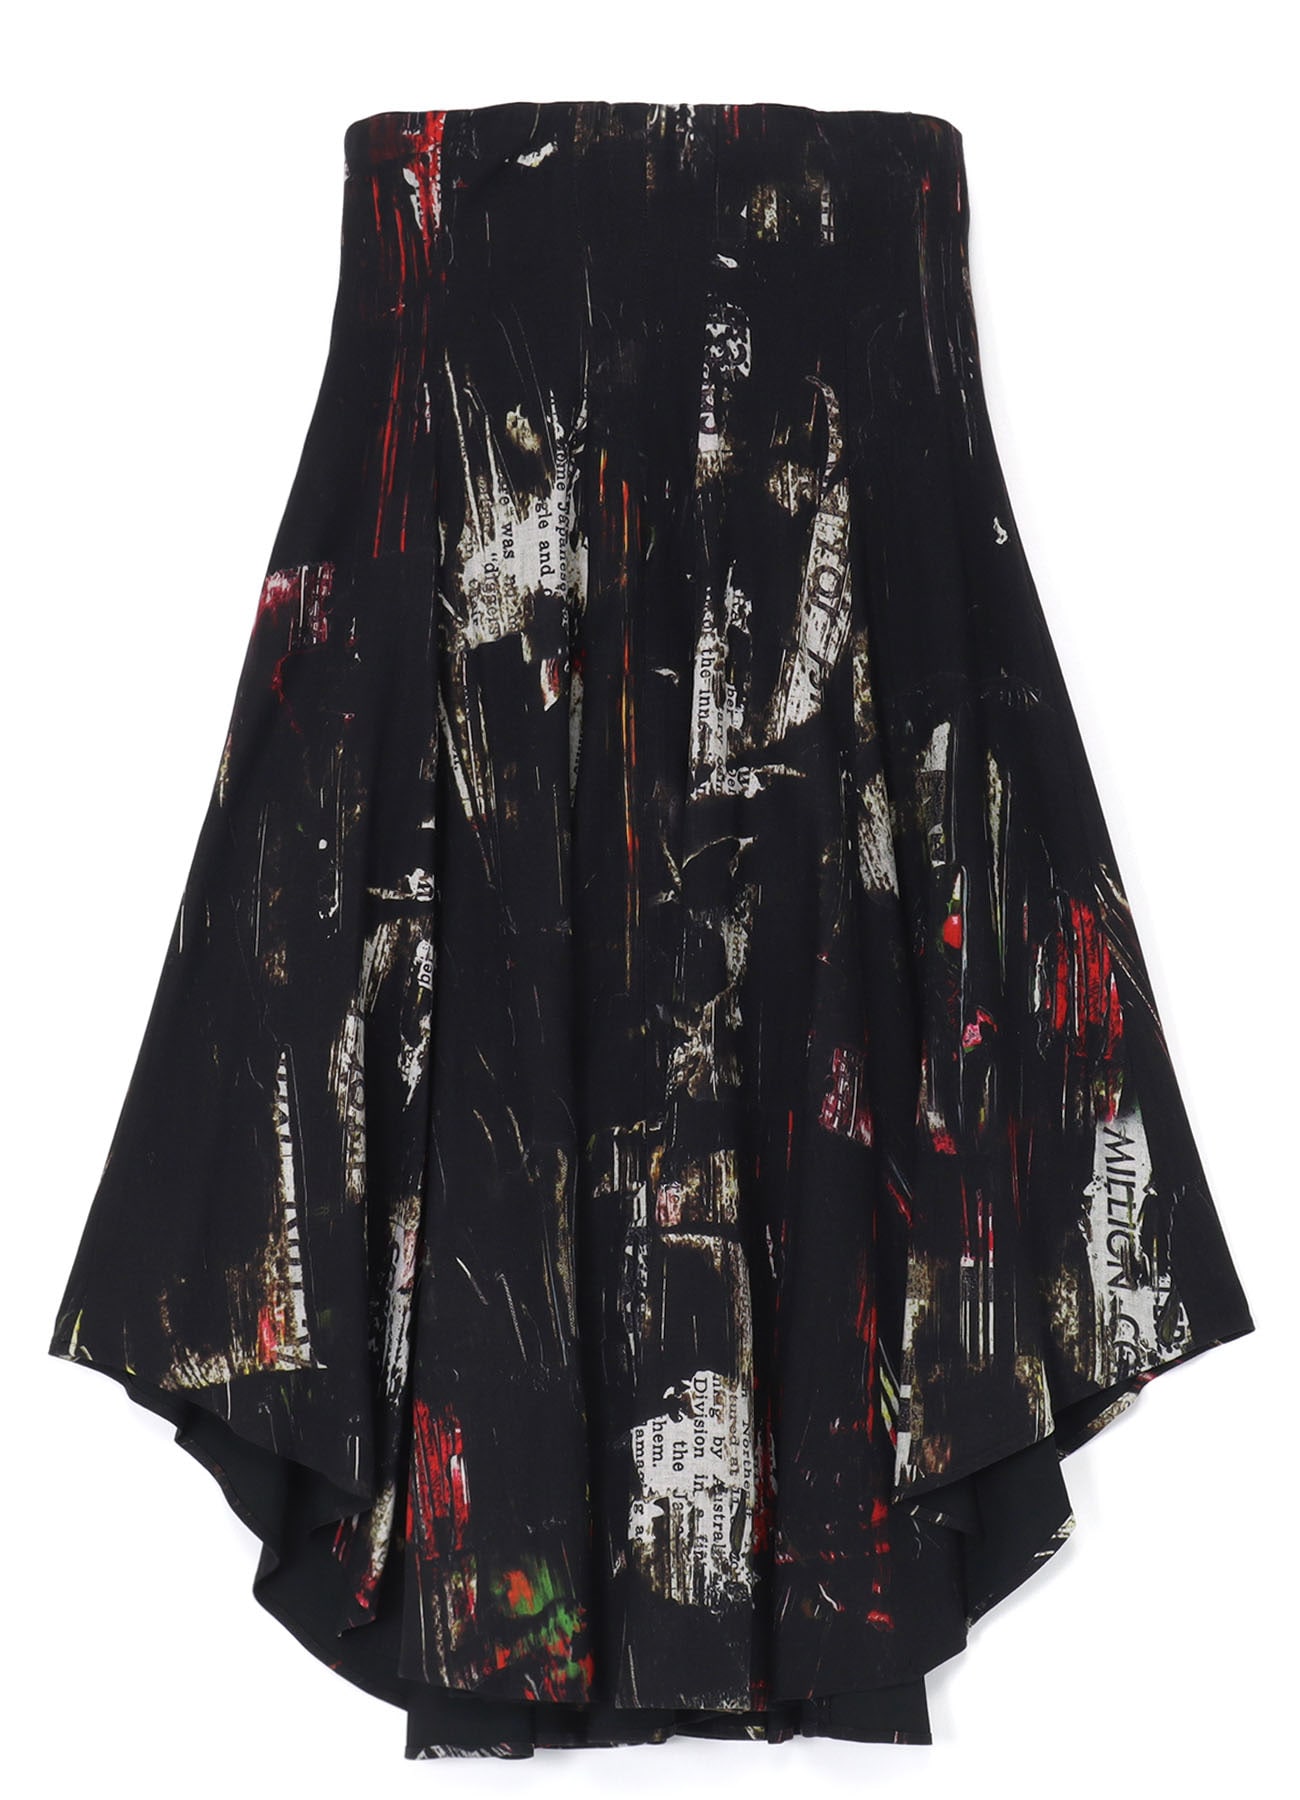 OIL PAINT PRINT LACE-UP DETAIL RAYON SKIRT